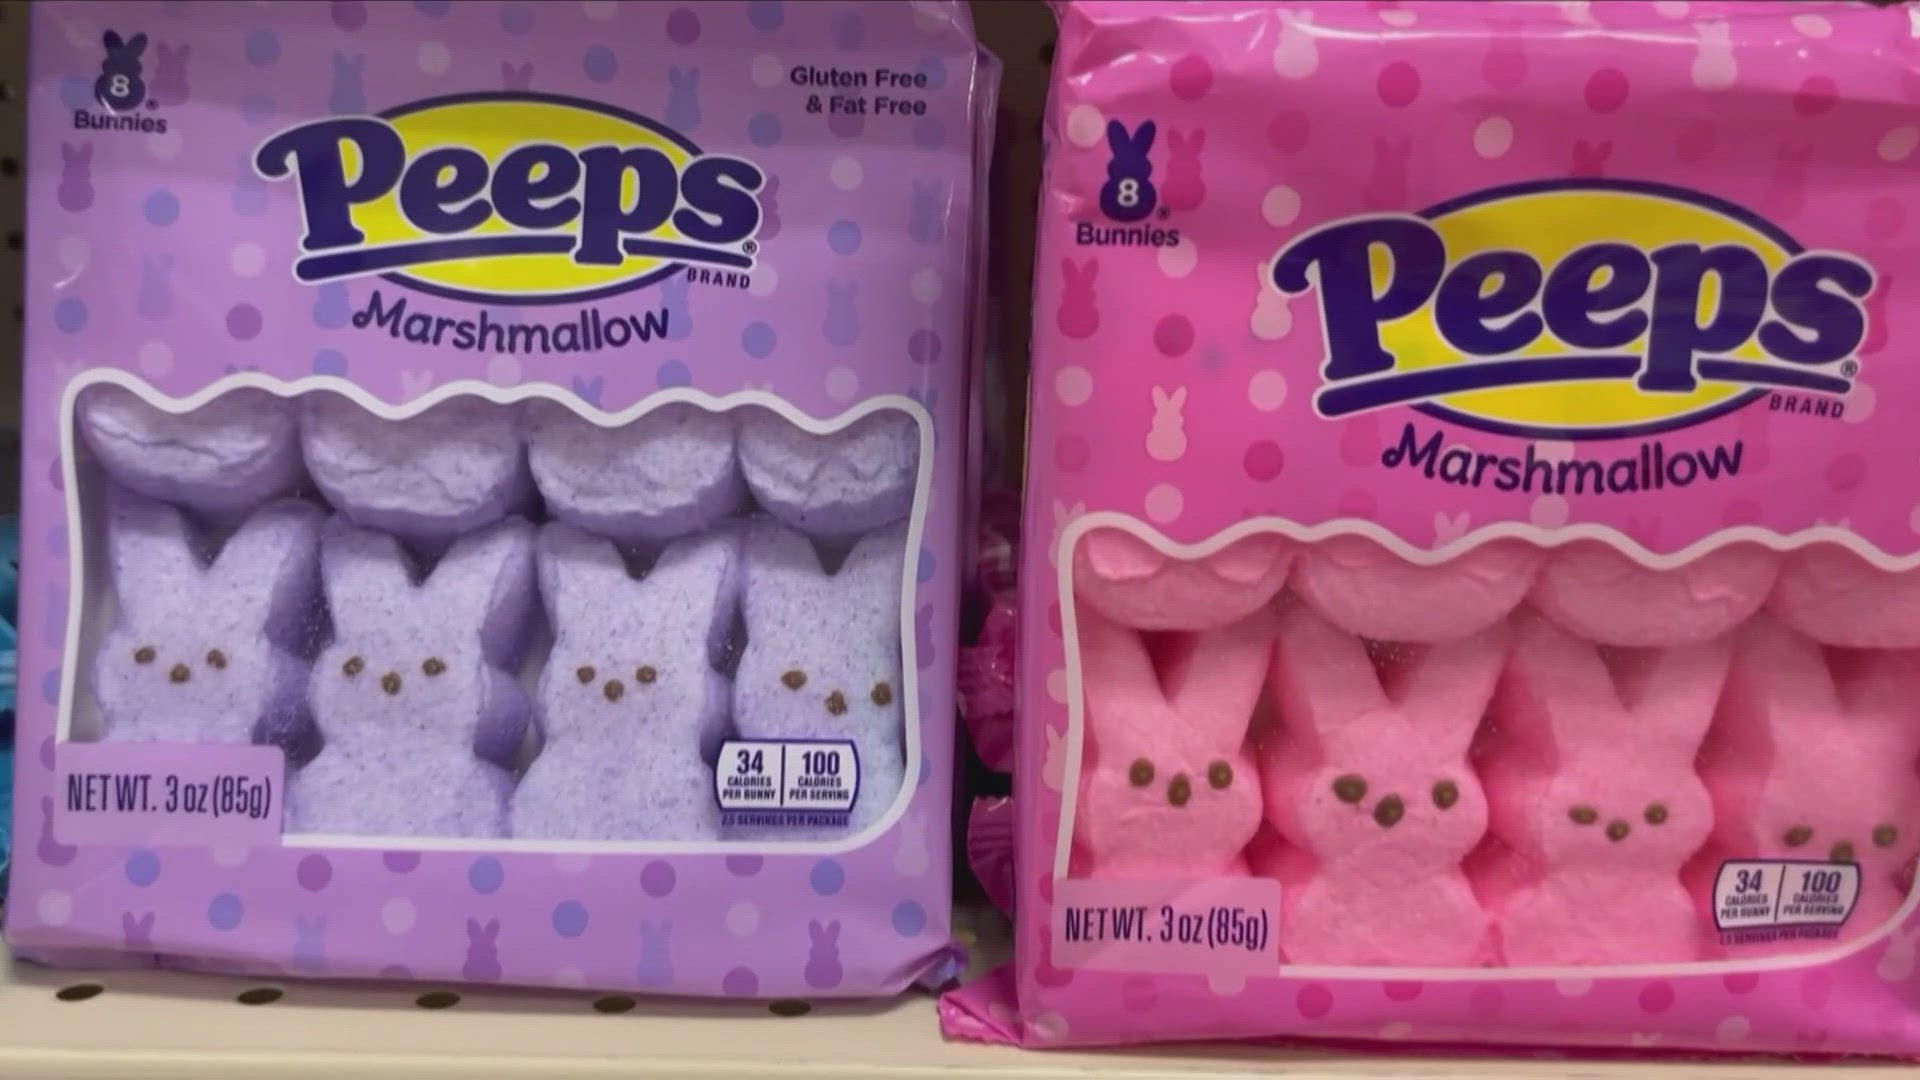 Listen up Peeps! As Easter approaches, Consumer Reports is warning parents about Peeps containing Red Dye No. 3 which has known carcinogens.